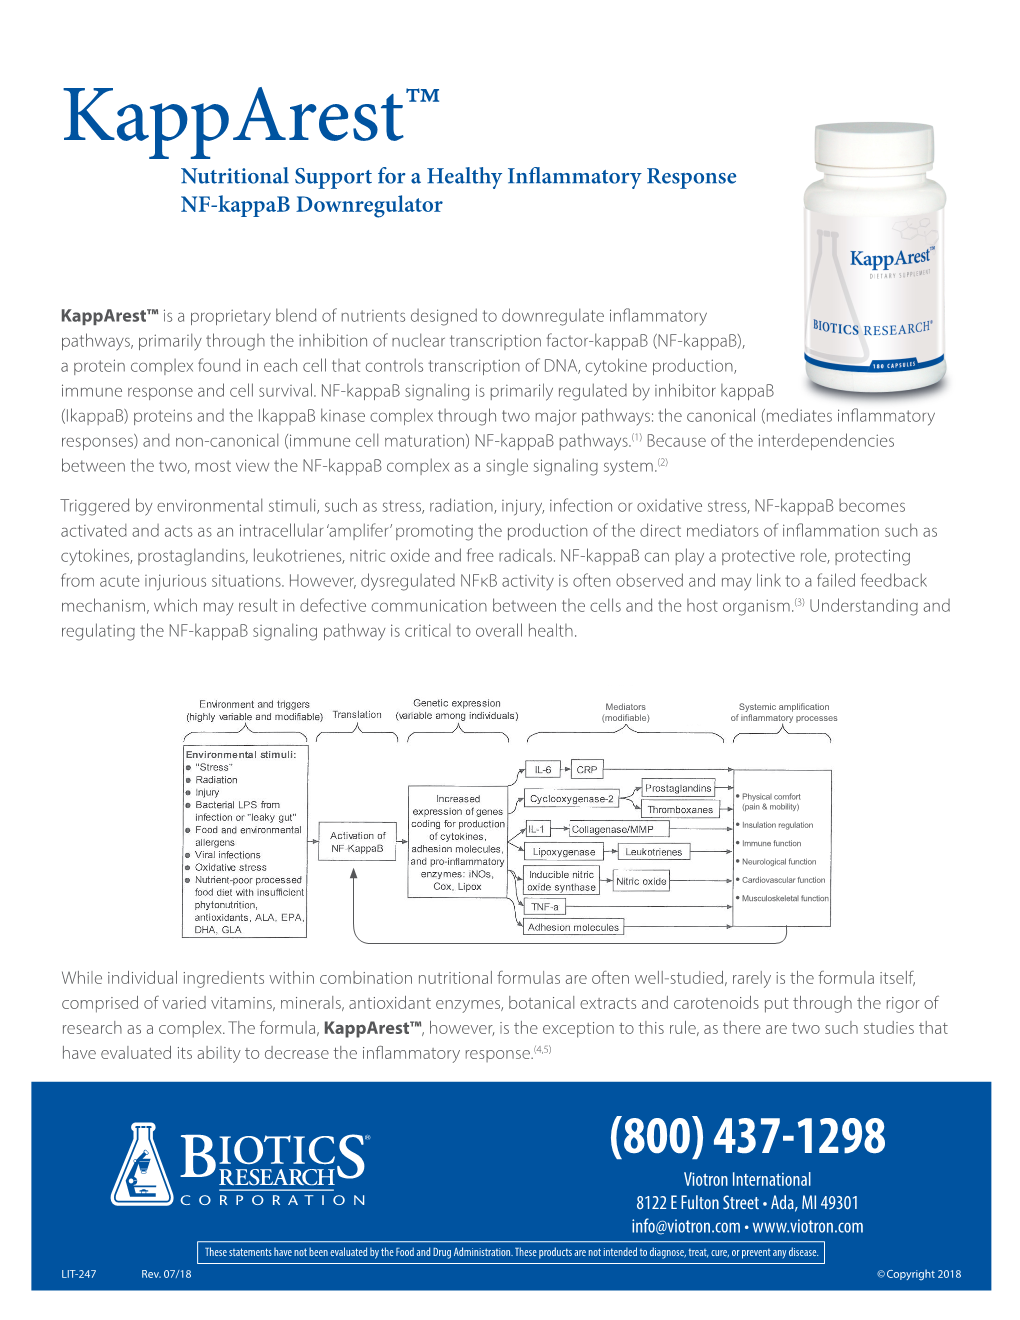 Kapparest™ Nutritional Support for a Healthy Inflammatory Response NF-Kappab Downregulator